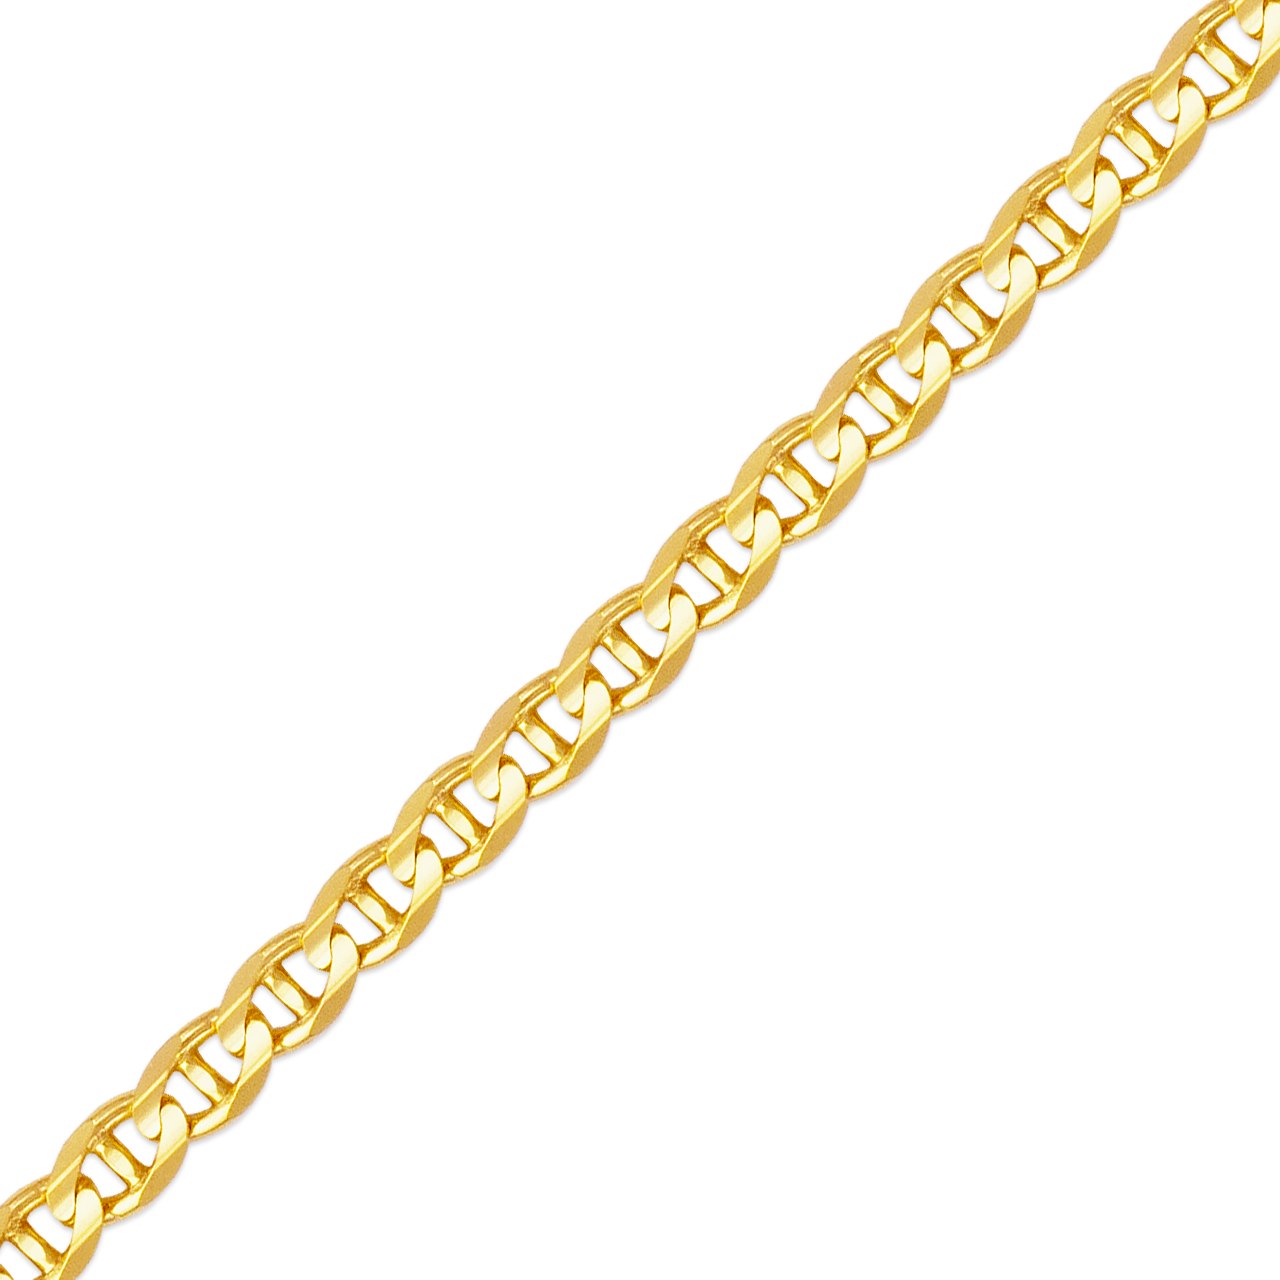 DoubleAccent 14K Gold Chain Concave Mariner Chain Necklace (16, 18, 20, 22, 24, 26 Inches)